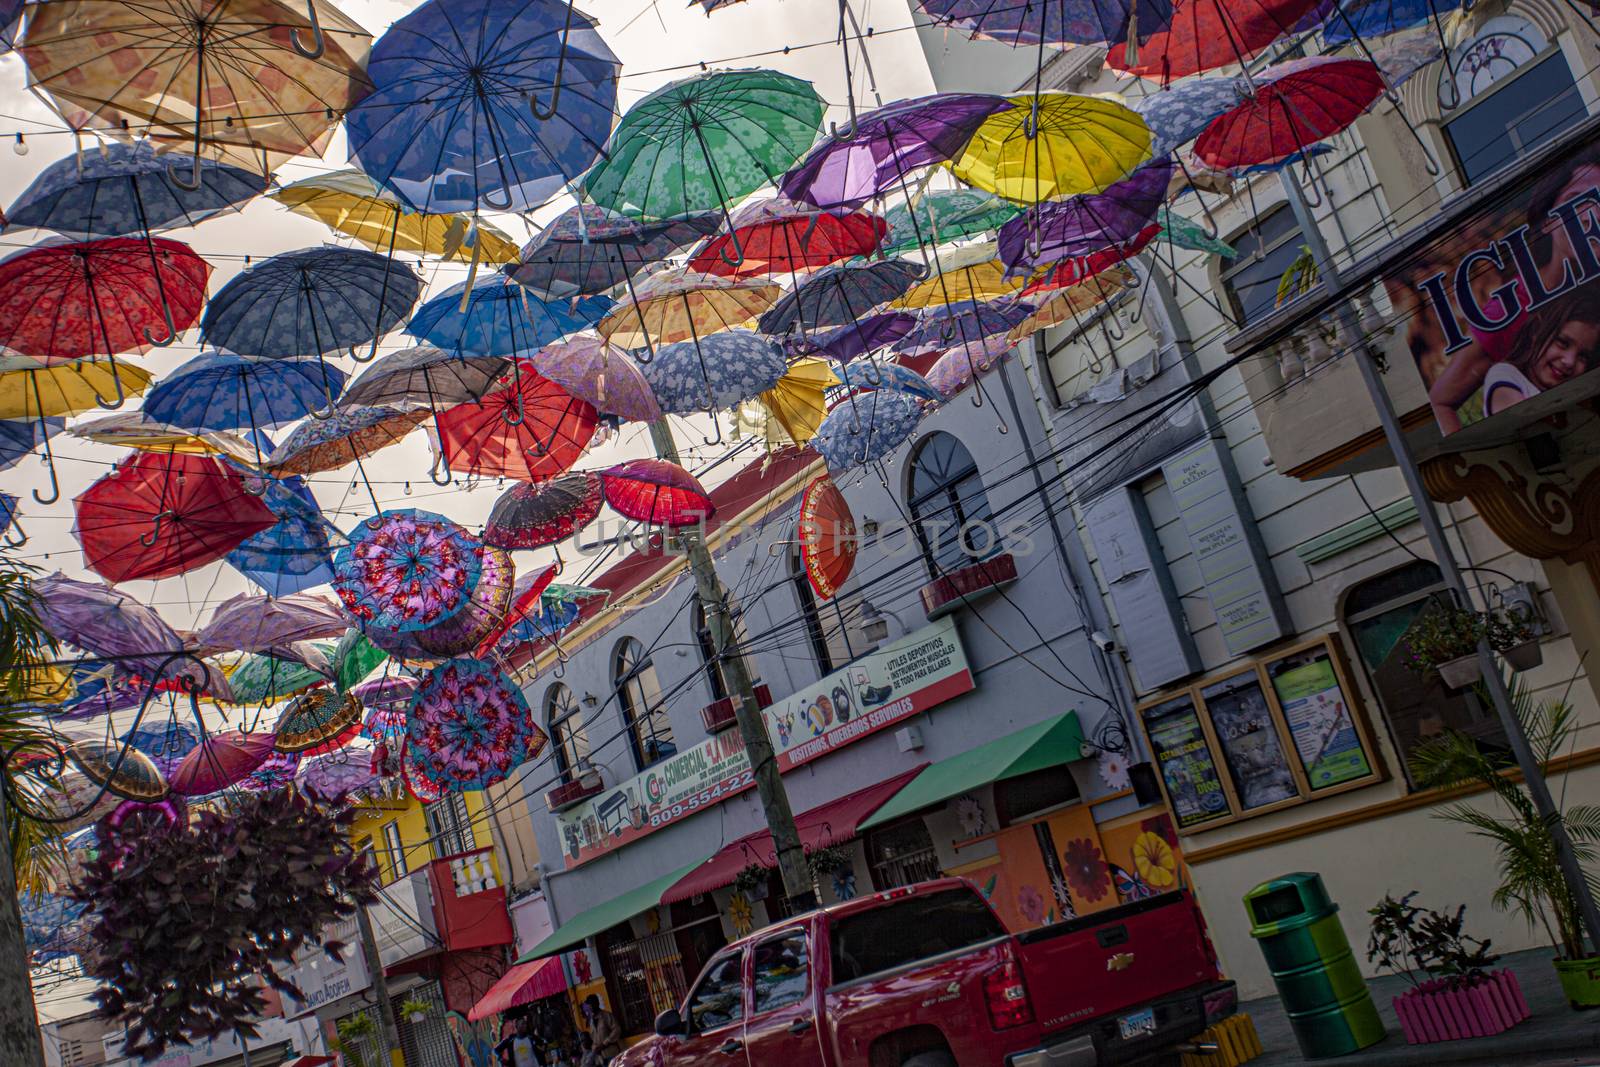 Colored umbrellas suspended in Higuey street 2 by pippocarlot